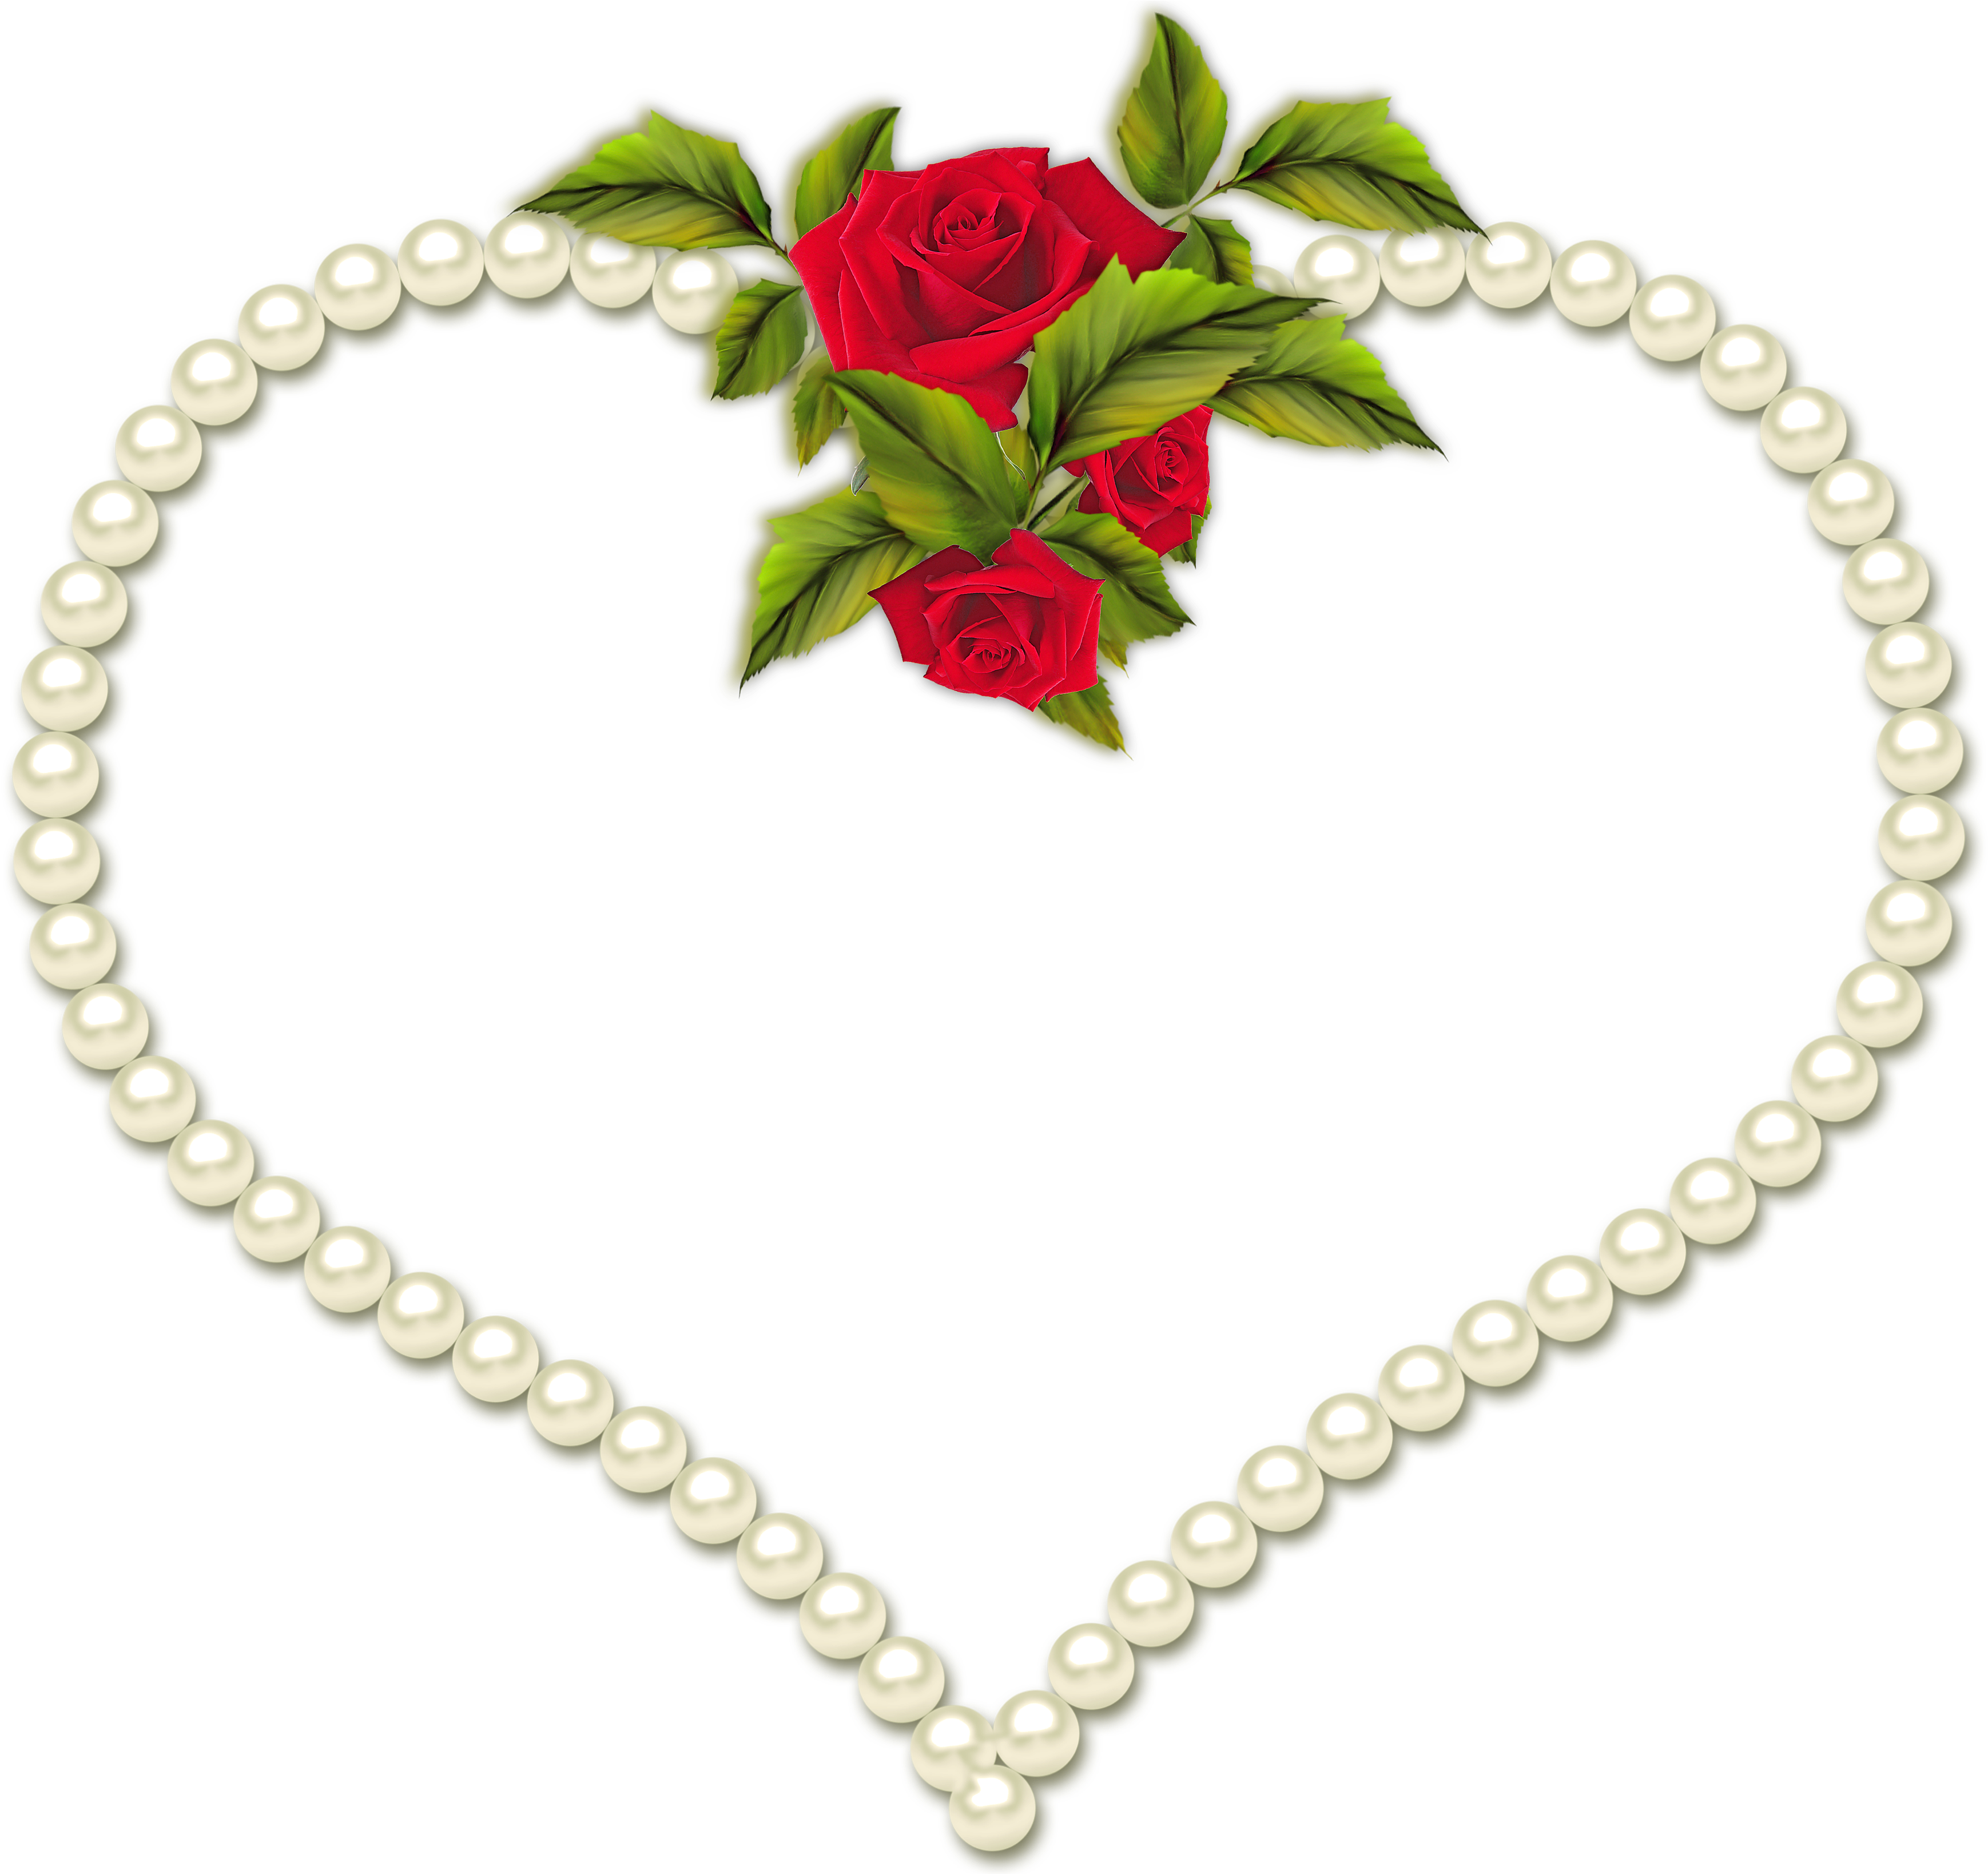 A Heart Shaped Pearl Necklace With Red Roses